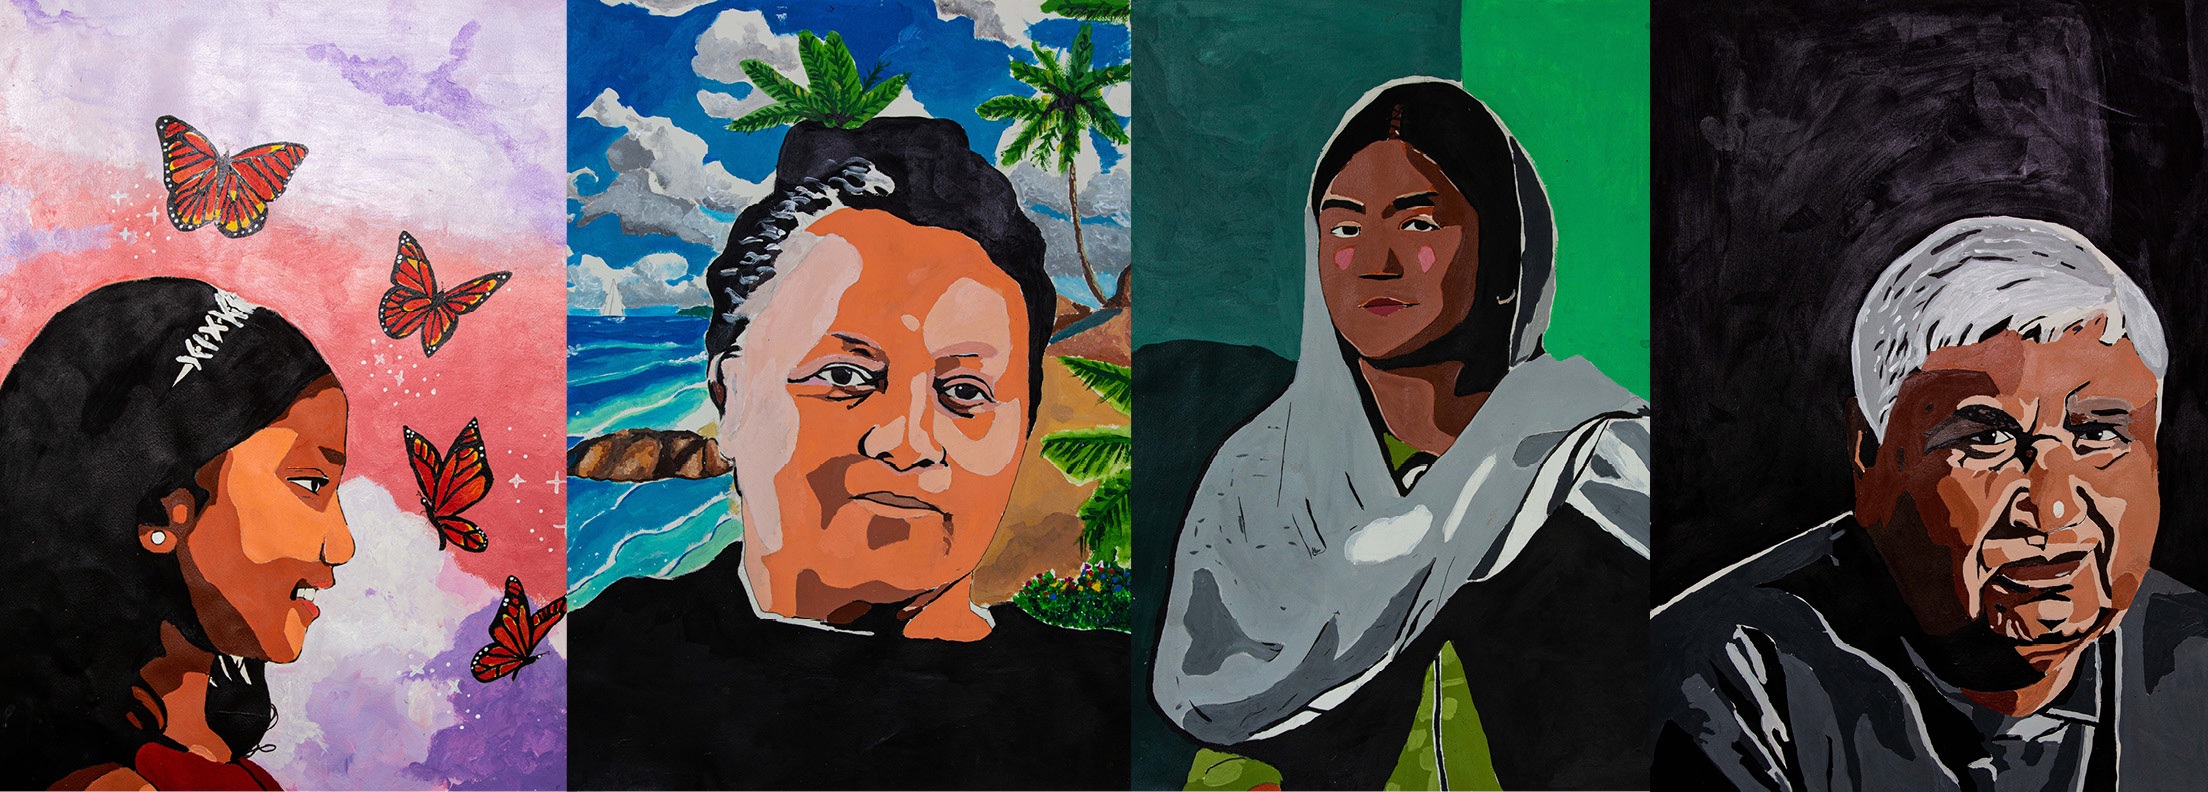 Collage of four painted portraits of different community members, including a young girl, two women and a male elder